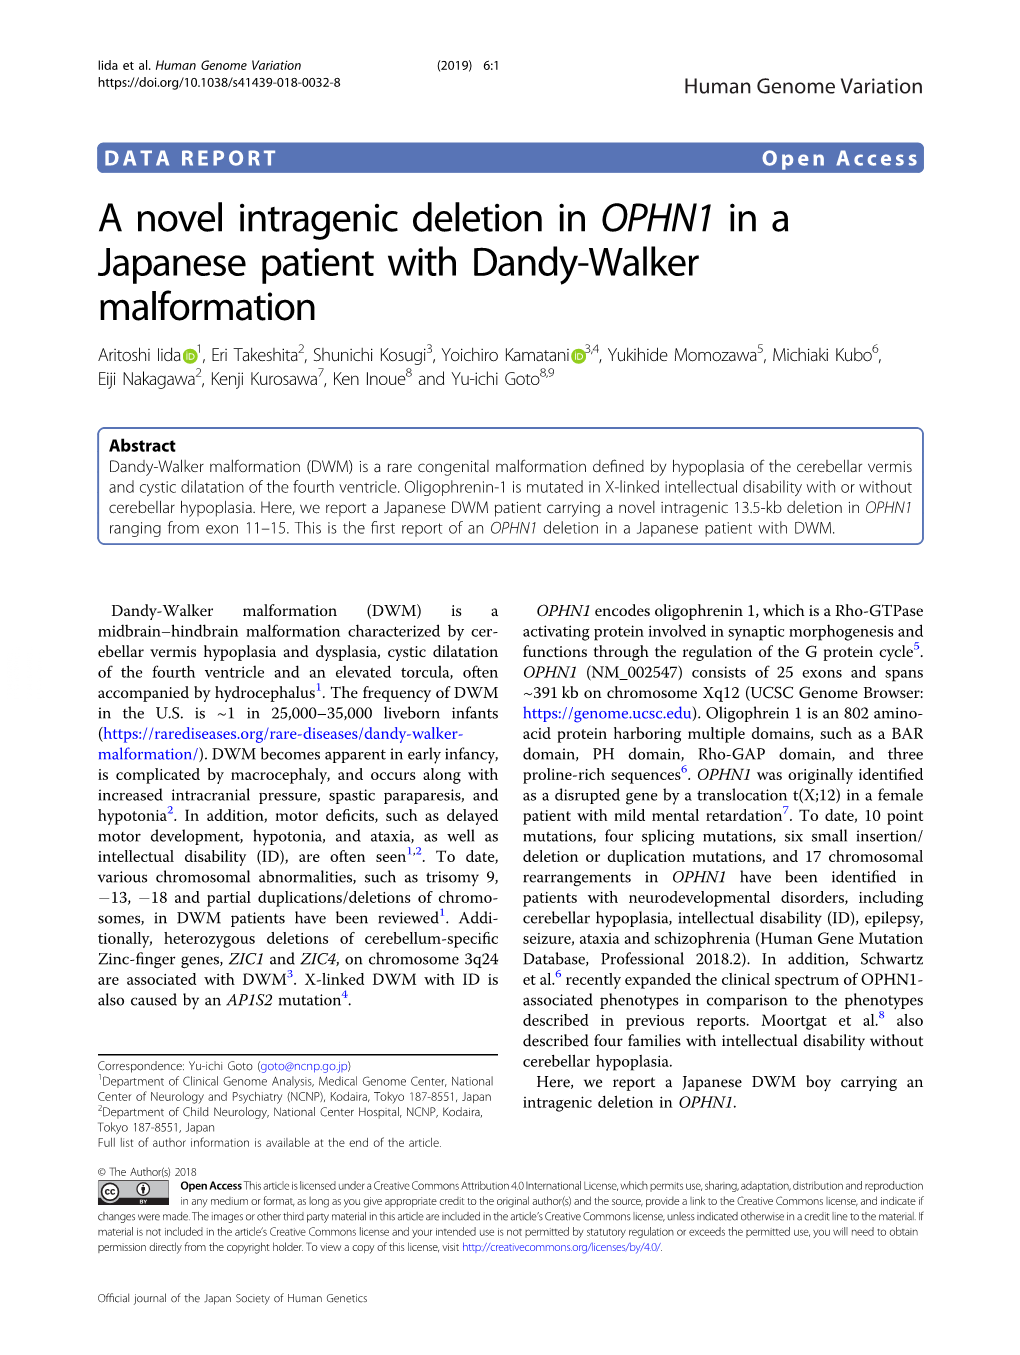 A Novel Intragenic Deletion in OPHN1 in a Japanese Patient with Dandy